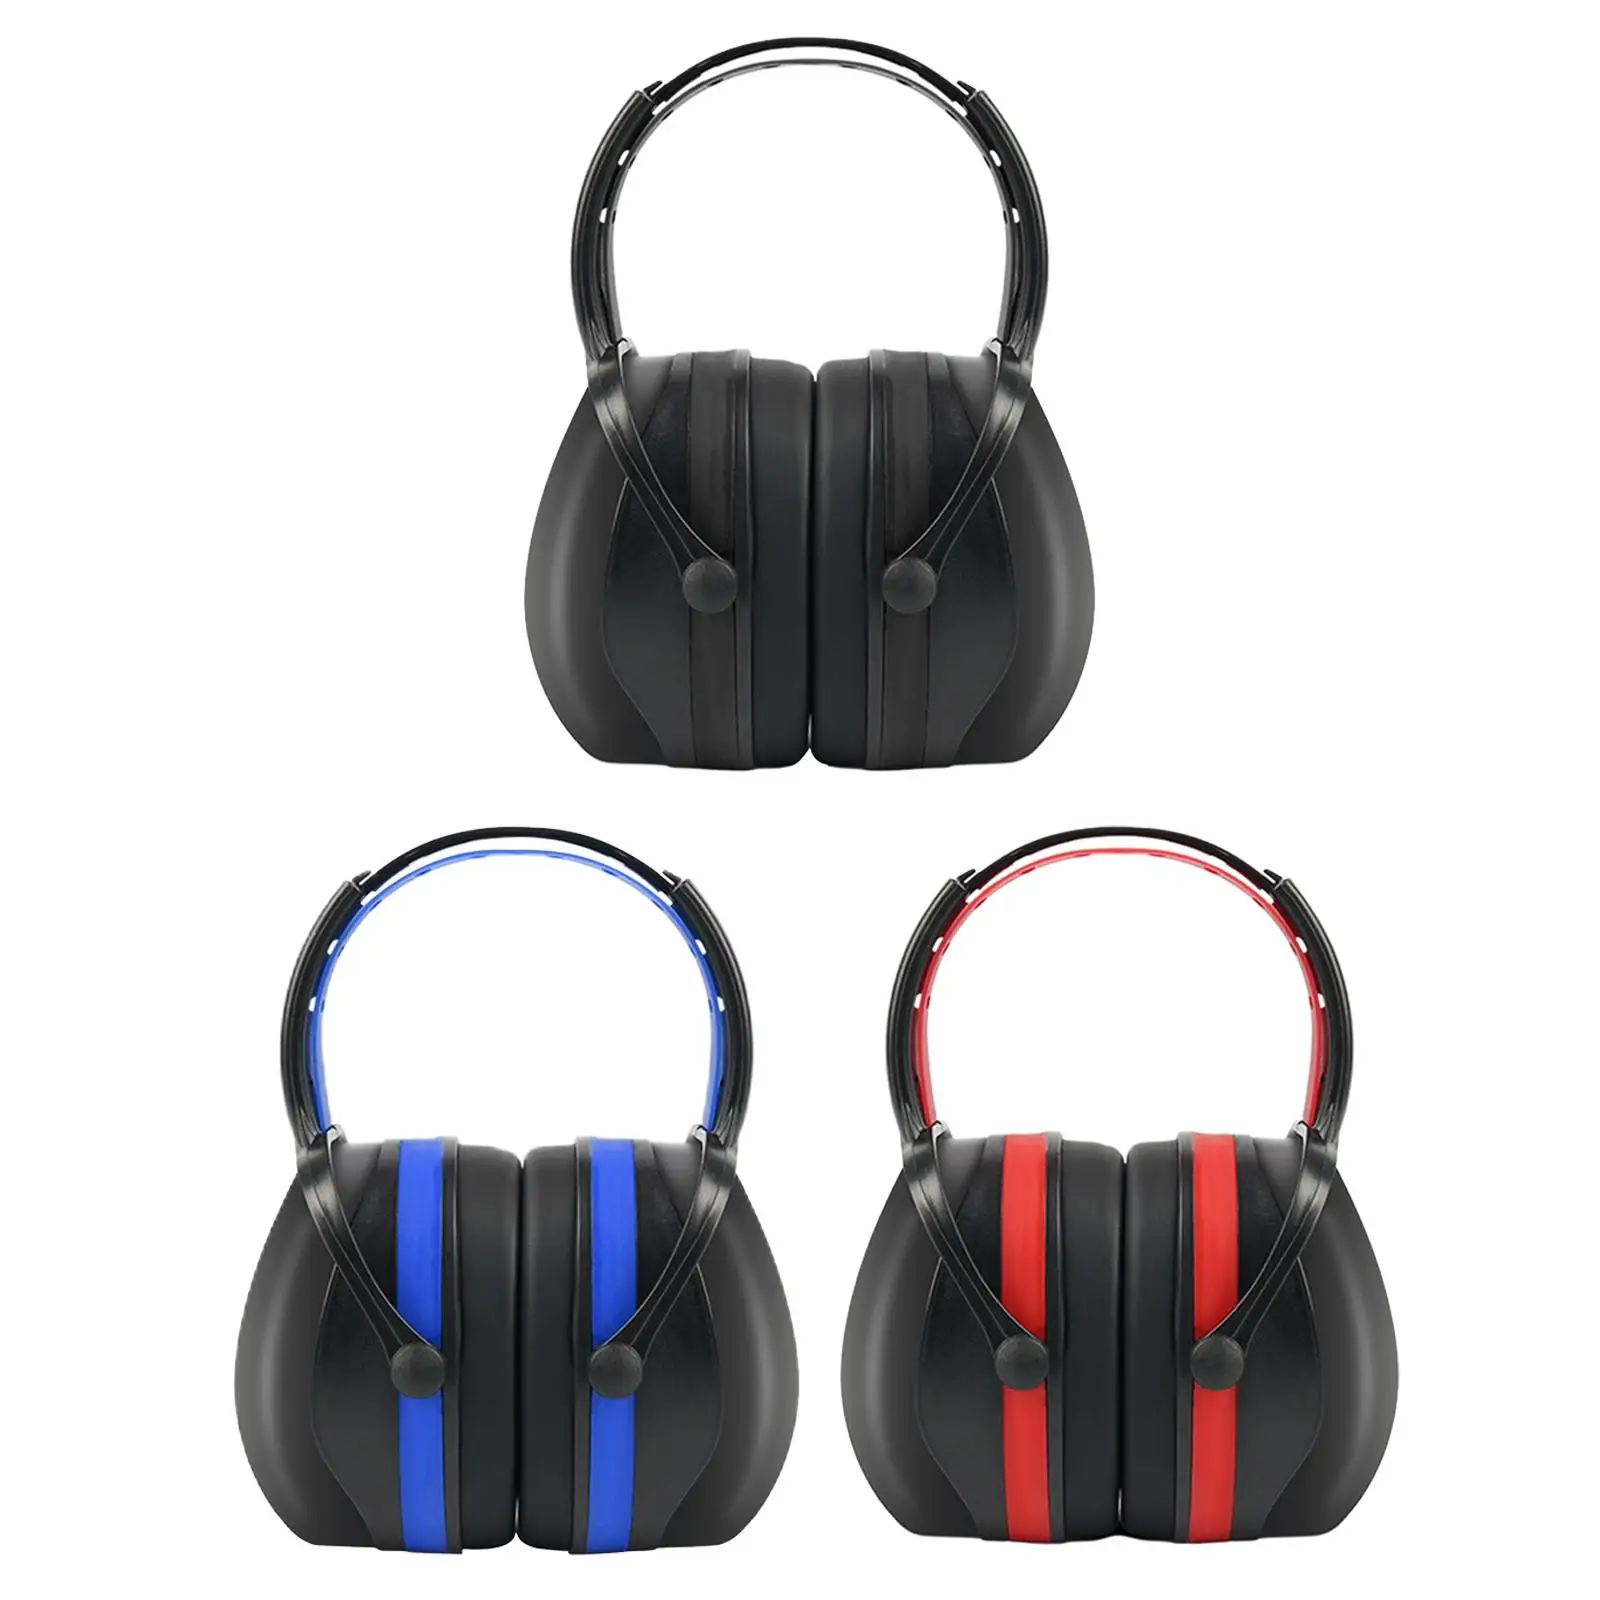 Hearing  Safety Ear Muffs Folding-Padded Noise-Reducing Ear Cups Hearing Protectors for Manufacturing Adult Children